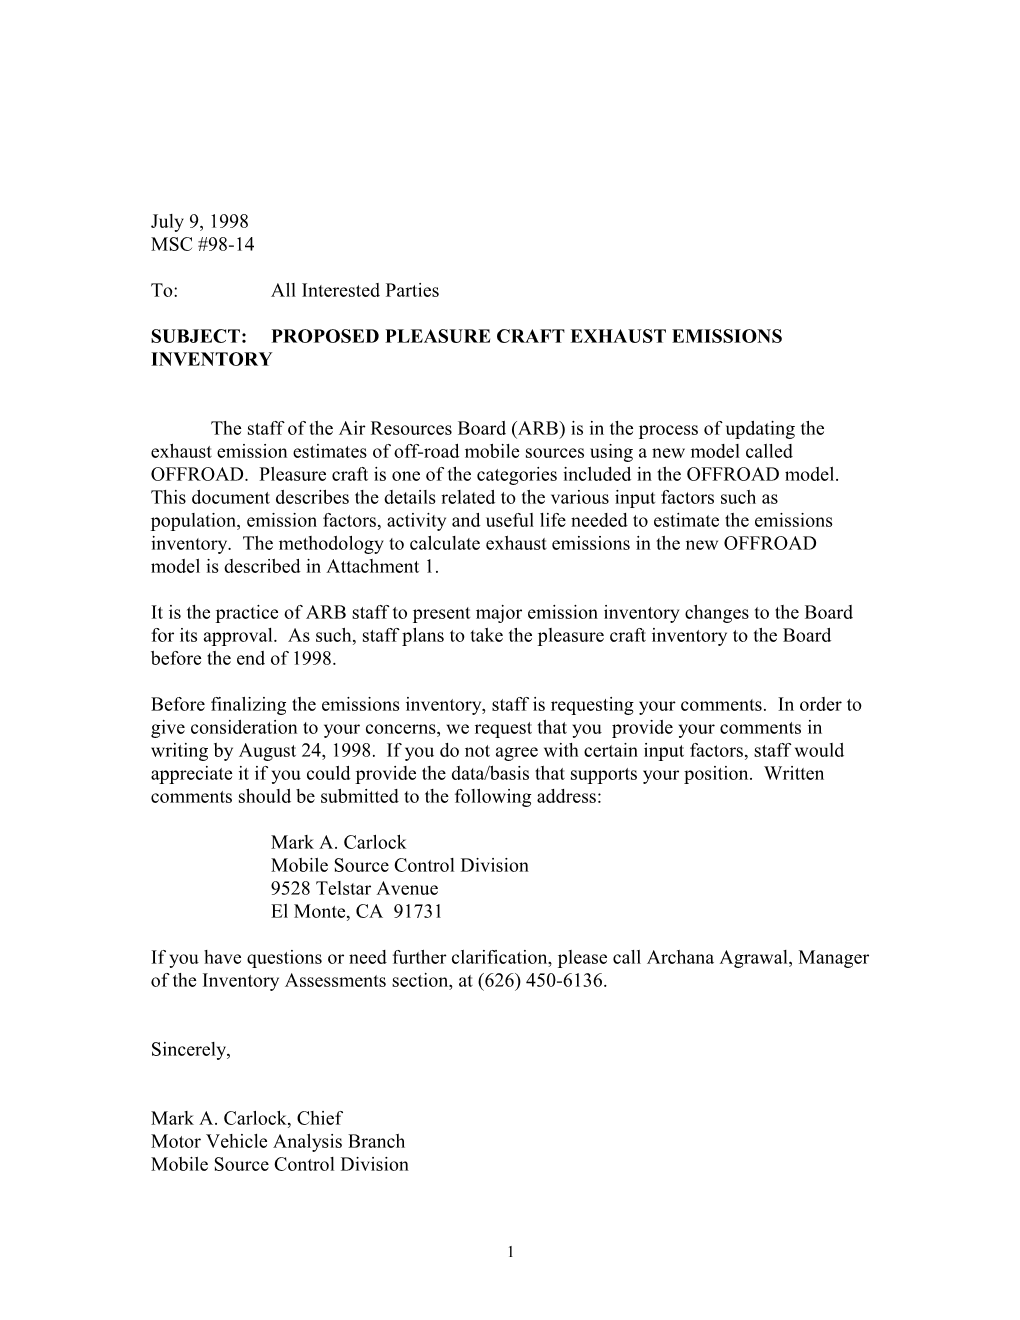 Subject:Proposed Pleasure Craft Exhaust Emissions Inventory